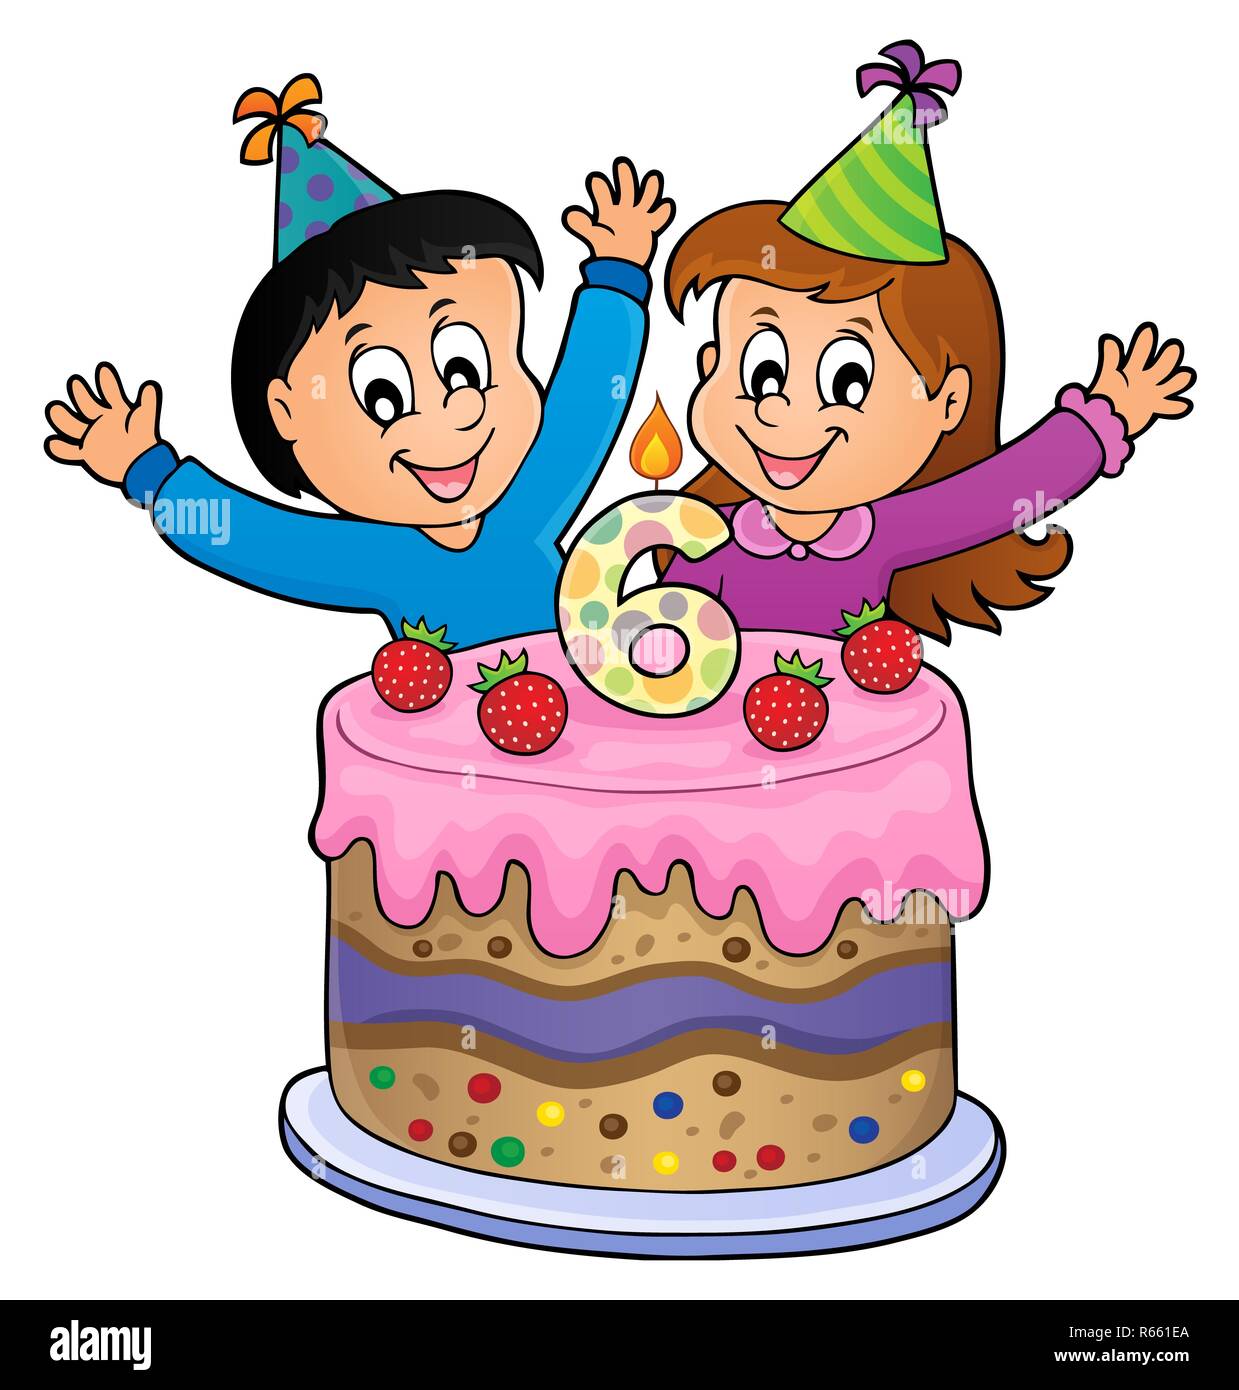 Happy birthday image for 6 years old Stock Photo